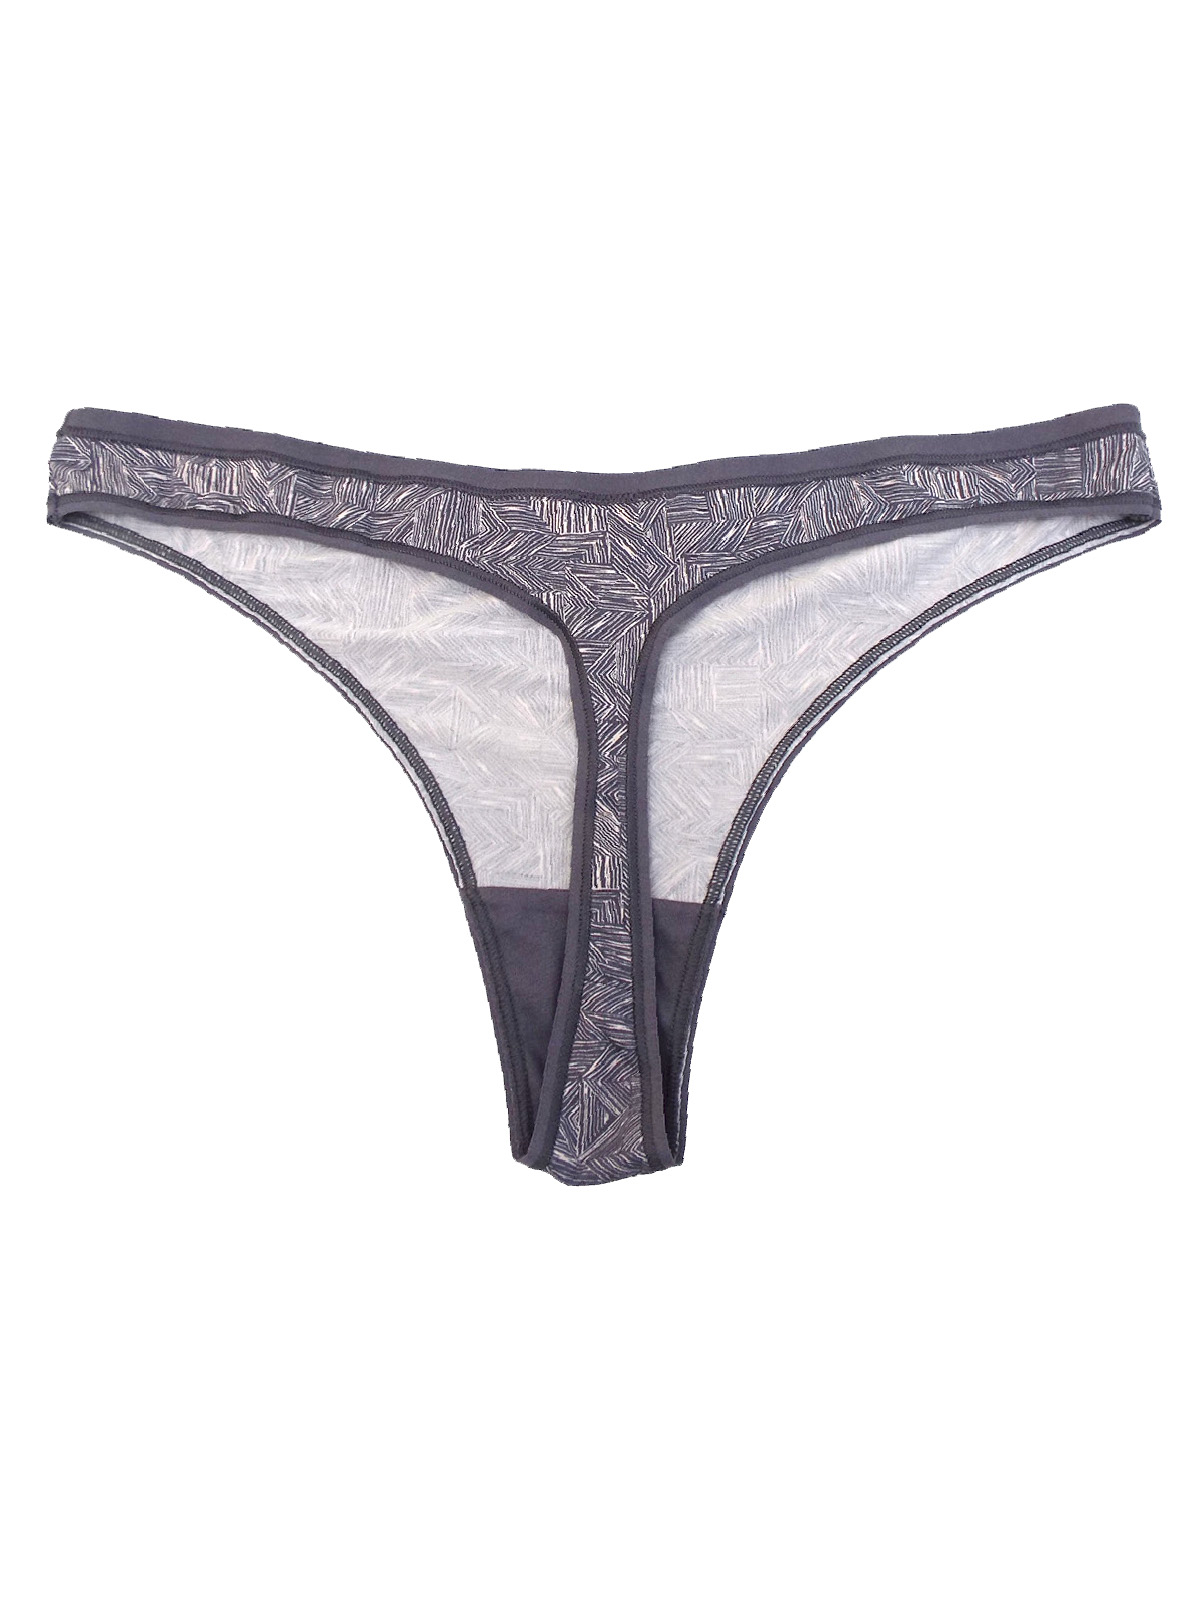 Marks and Spencer - - M&5 TAUPE Geo Print Microfibre Thong - Size 6 to 18